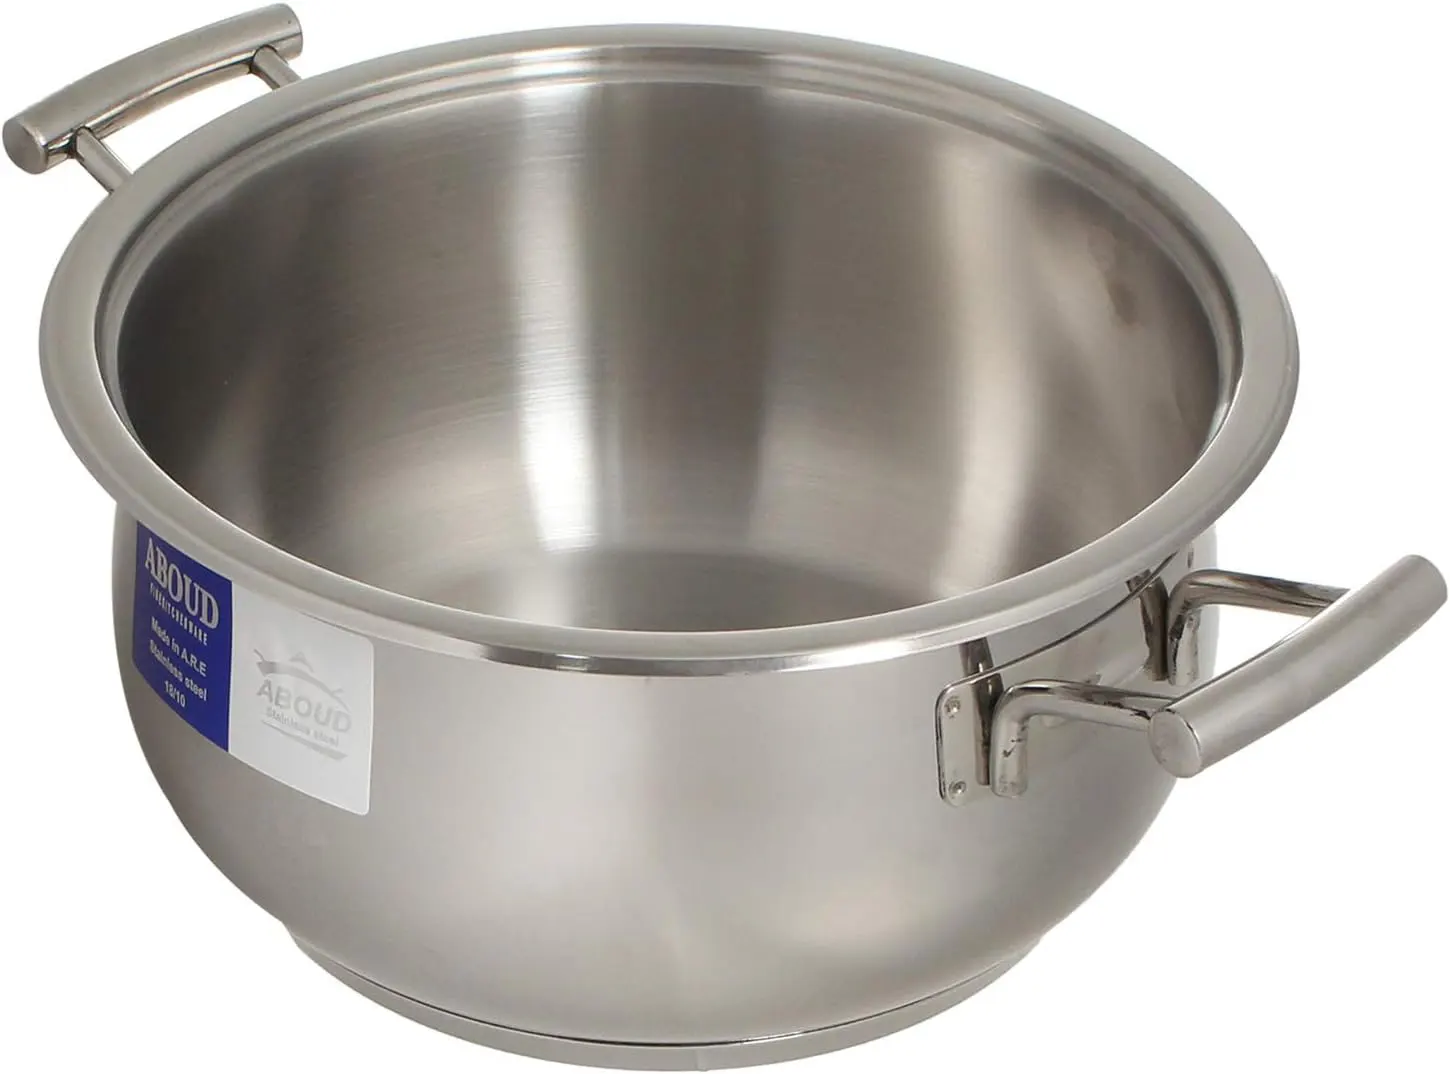 Aboud Bombay stainless steel pot with platinum handle , size 16, silver